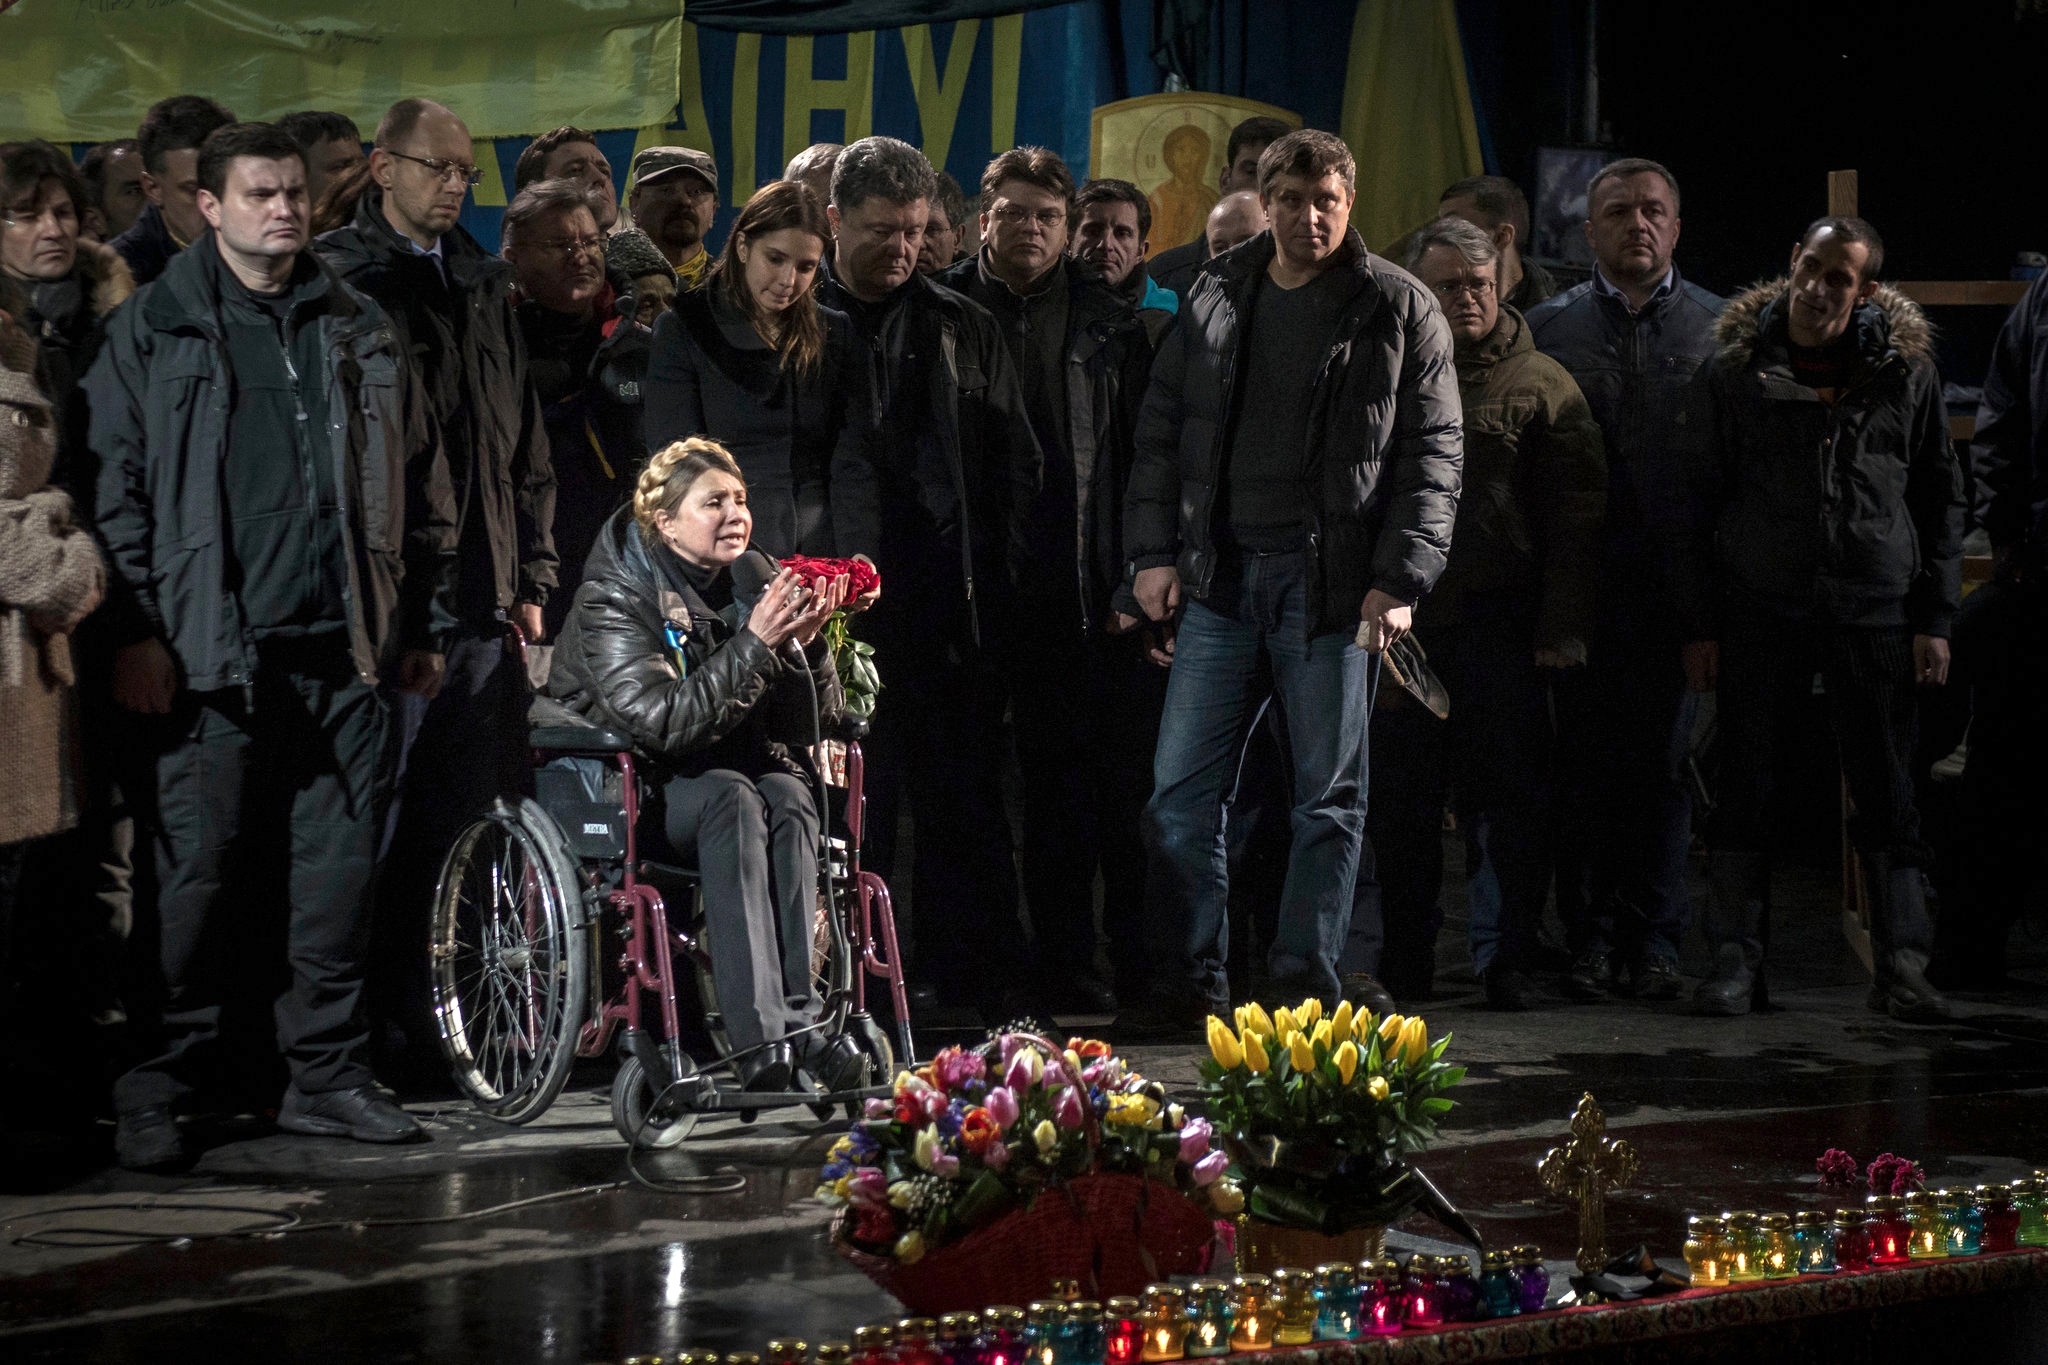 February 22, 2014. Former Ukranian Prime Minister Yulia Tymoshenko spoke from the stage at Independence Square in Kiev following the ouster of President Victor F. Yanukovych. Photo by Sergey Ponomarev for the New York Times.